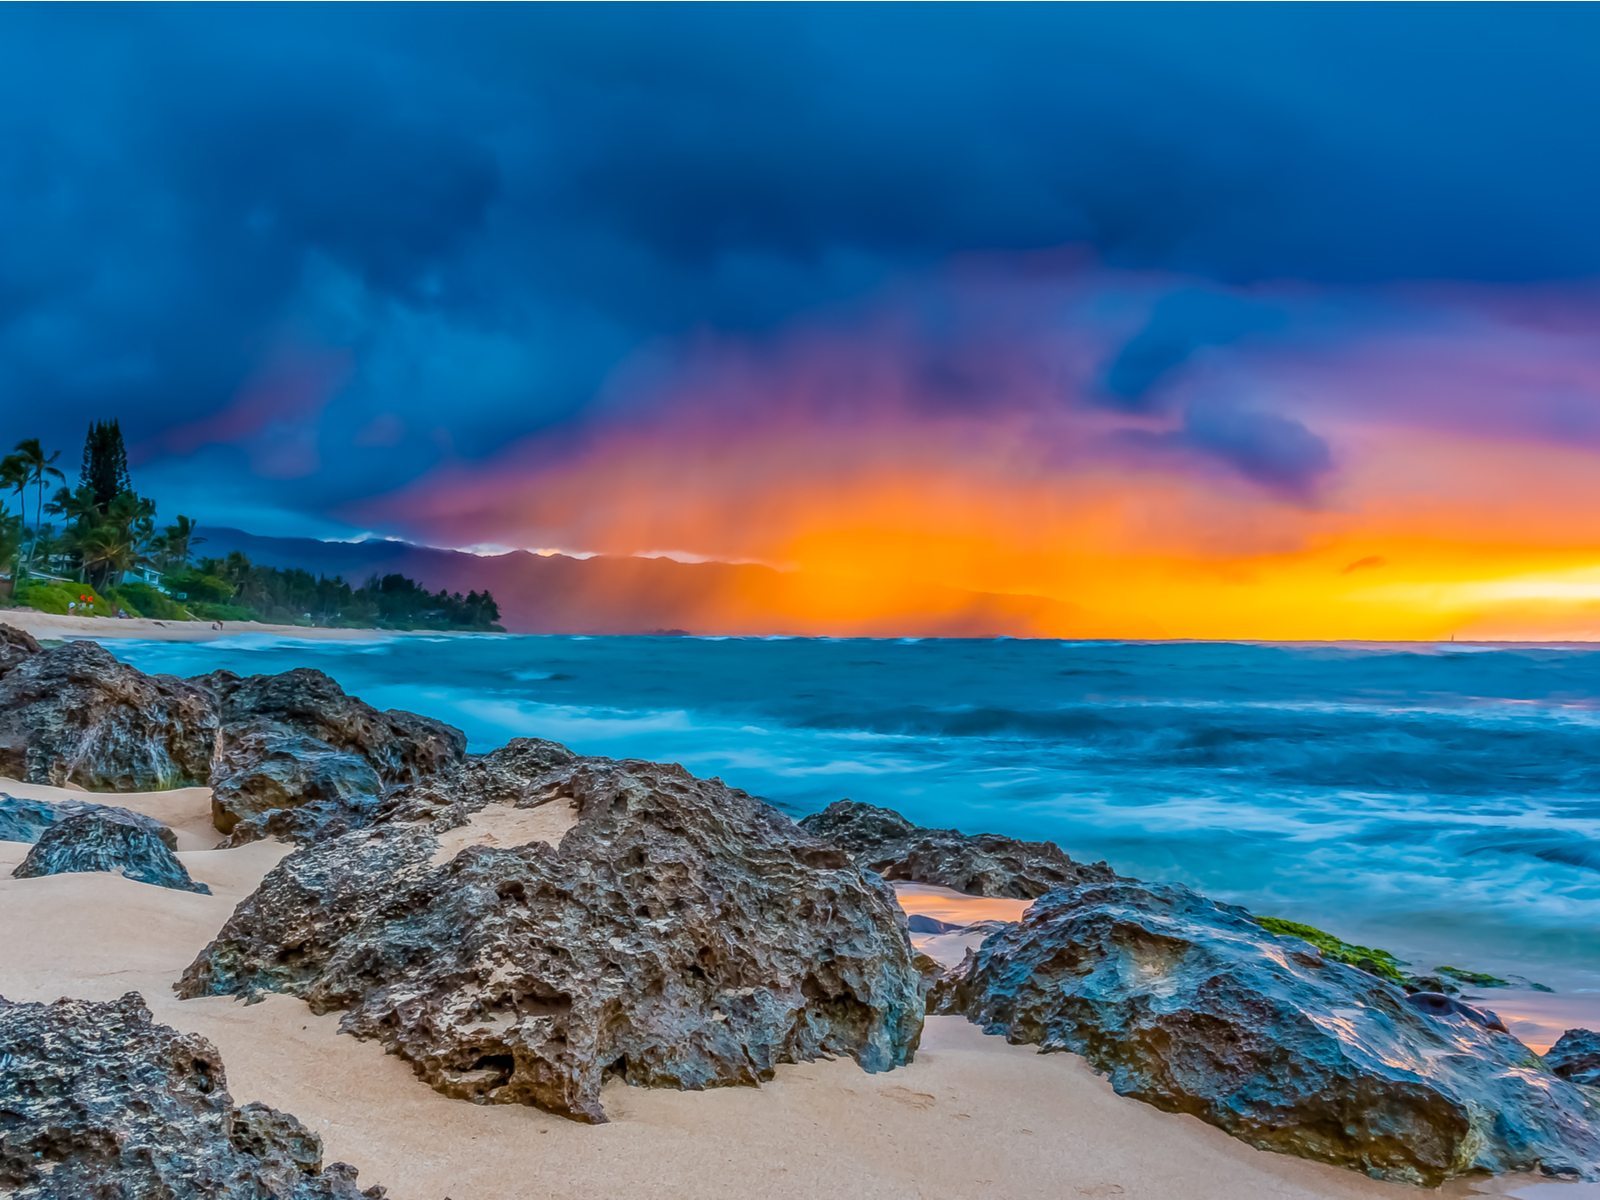 Skies on fire at sunset with rain in the background on the north shore during the best time to visit Oahu